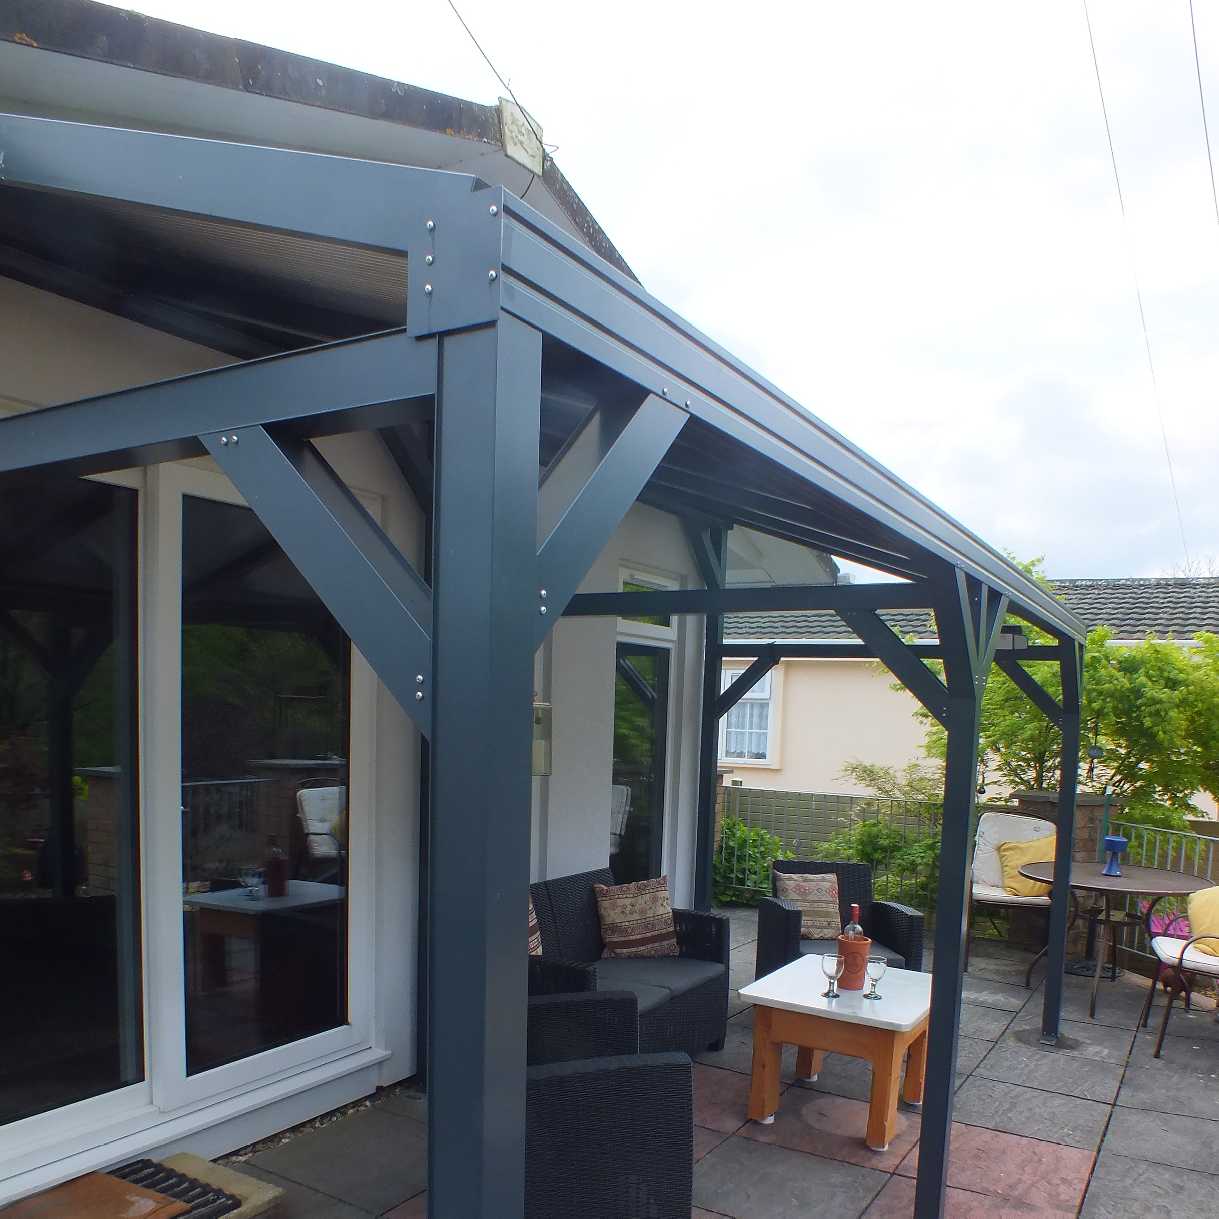 Affordable Omega Smart Free-Standing, Anthracite Grey MonoPitch Roof Canopy with 16mm Polycarbonate Glazing - 3.1m (W) x 3.0m (P), (4) Supporting Posts